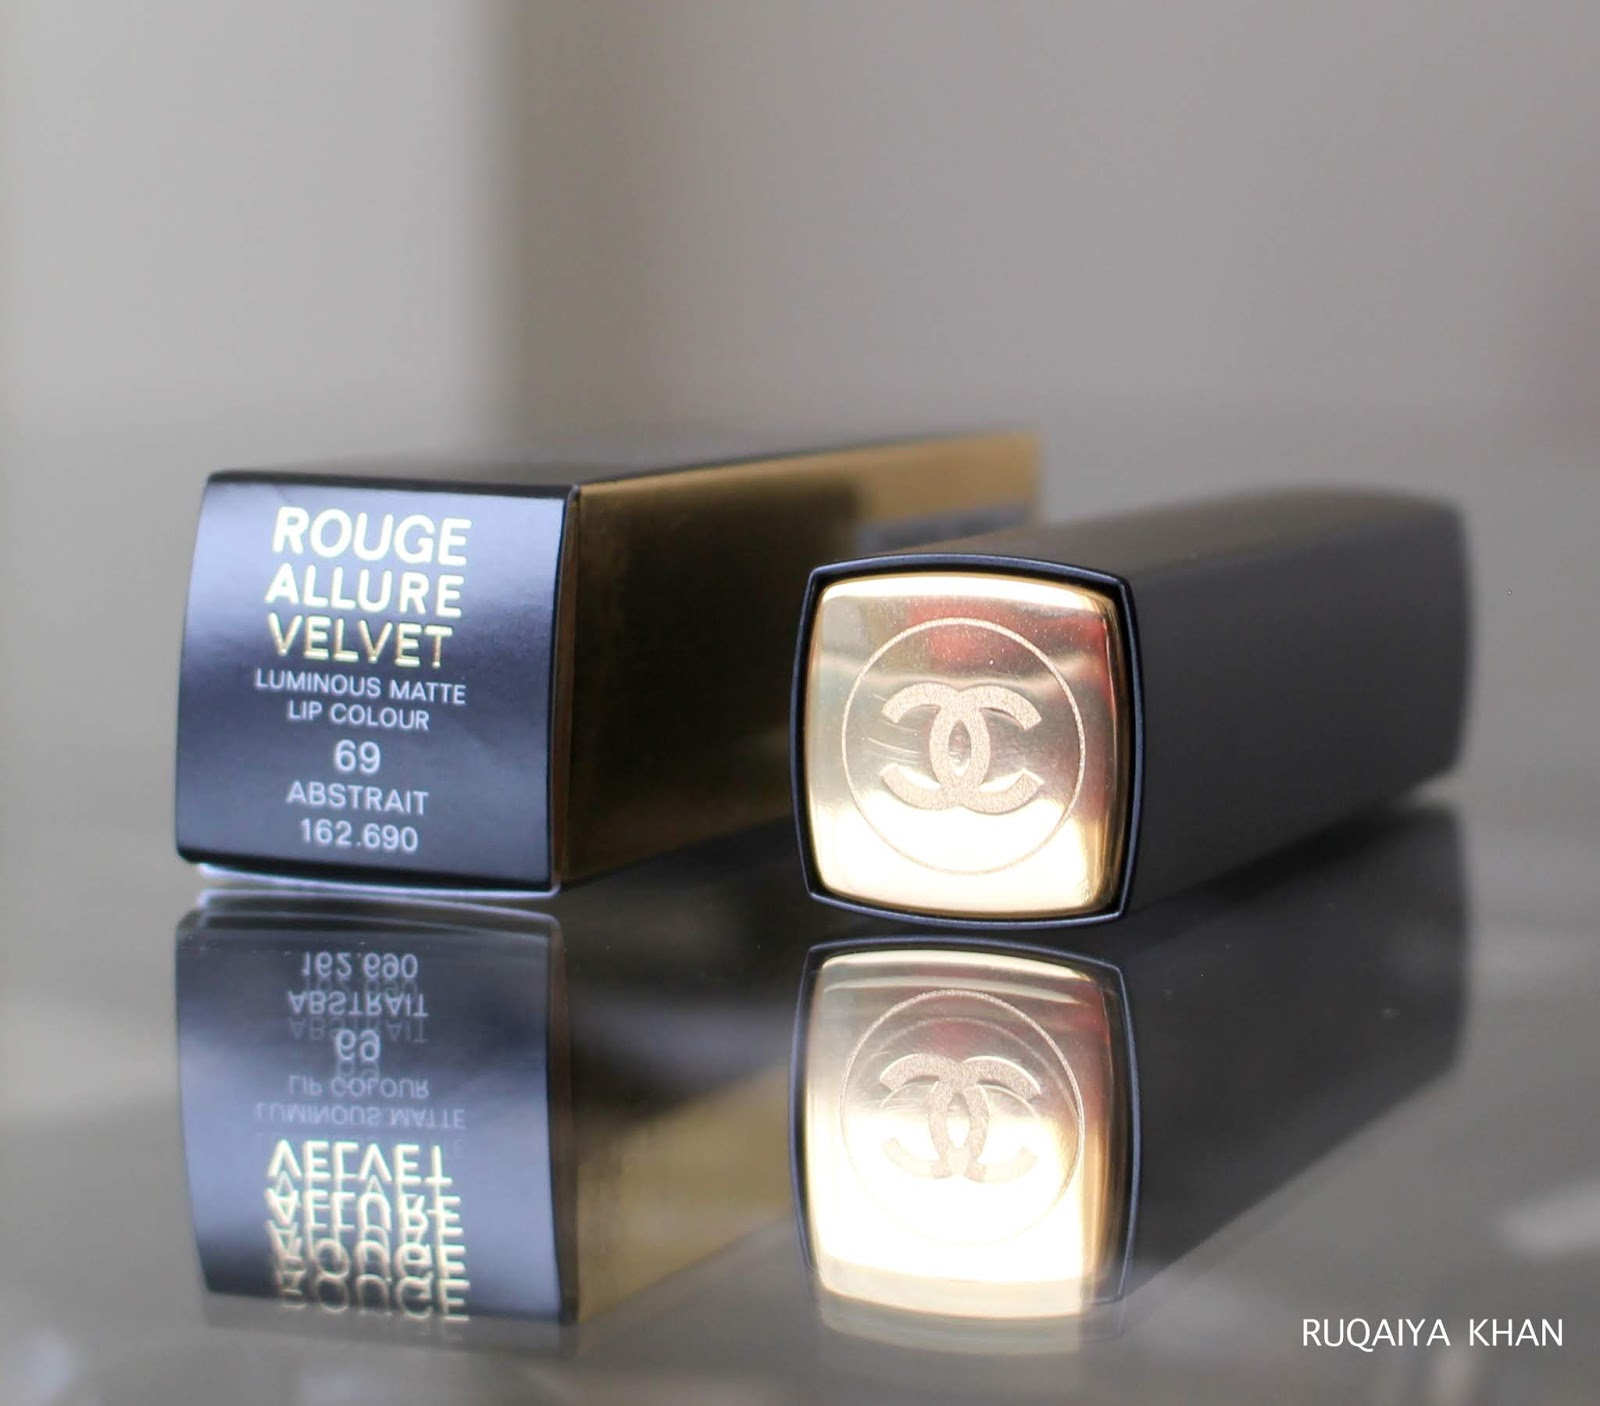 Ruqaiya Khan: CHANEL NUDE LIPSTICKS - Rouge Allure Velvet in 69 Abstrait & Rouge  Coco in Mademoiselle - Review with Swatches